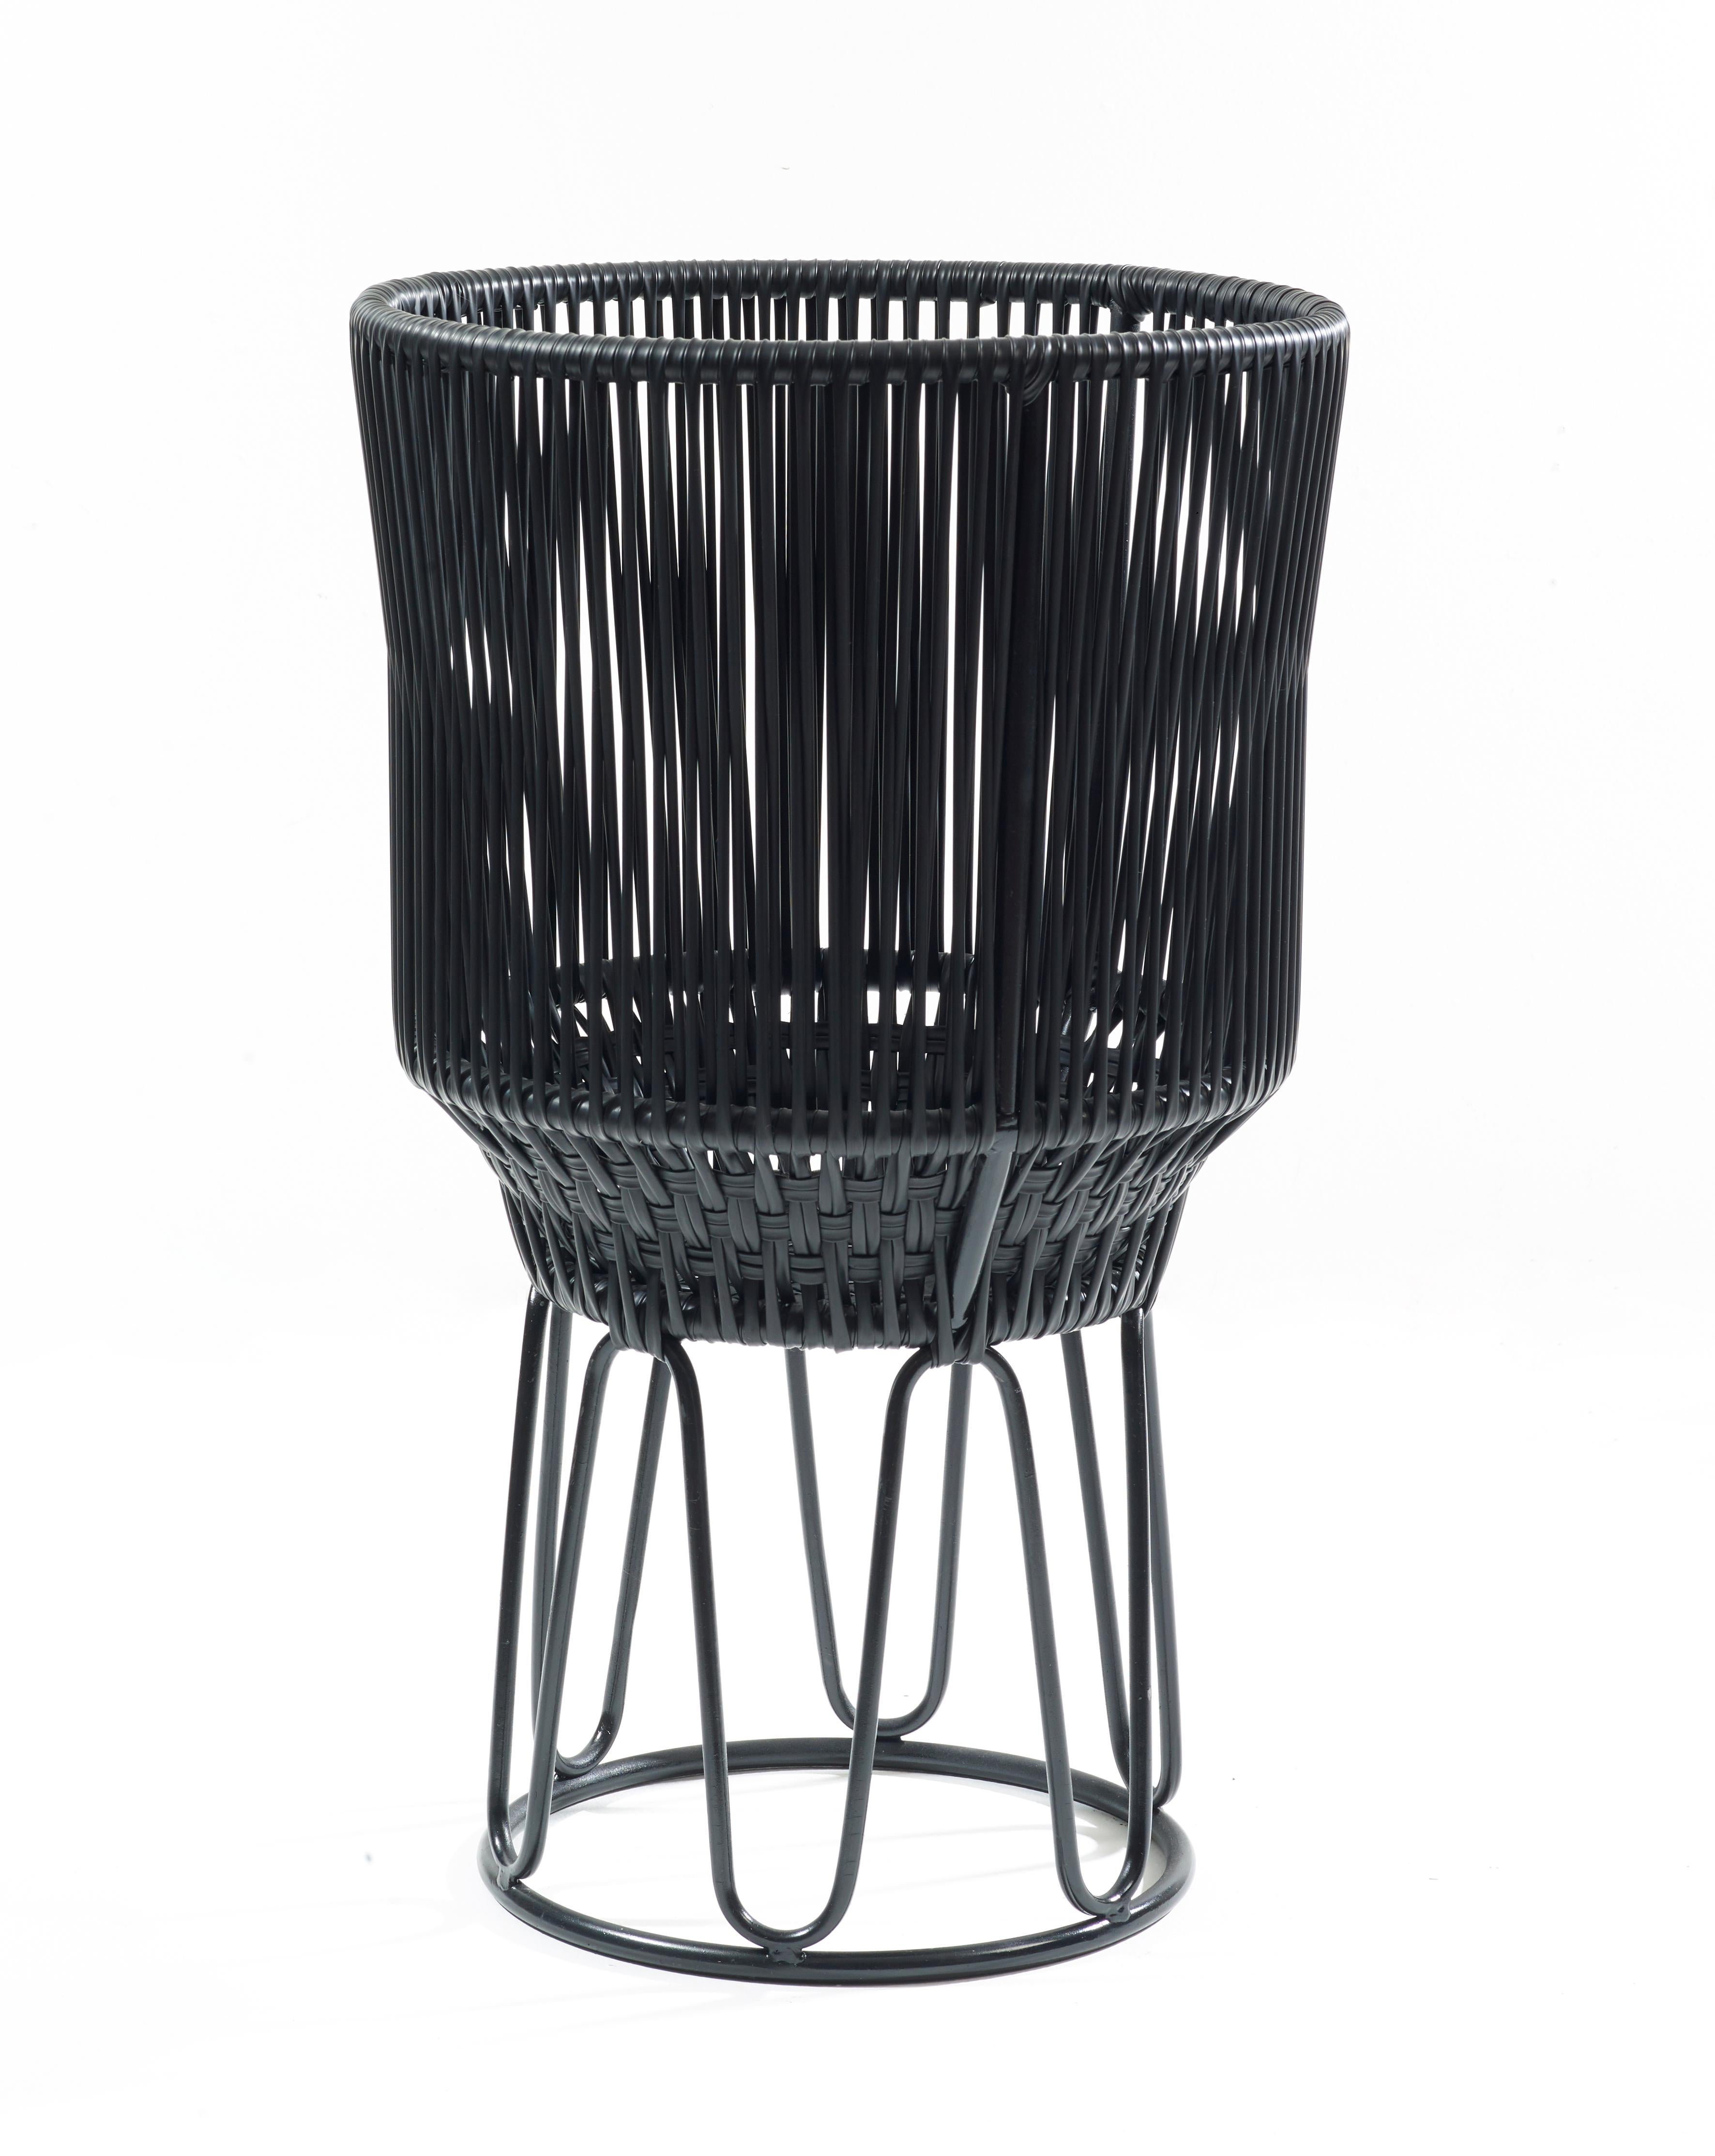 Black circo flower pot 2 by Sebastian Herkner
Materials: Galvanized and powder-coated tubular steel. PVC strings.
Technique: Made from recycled plastic. Weaved by local craftspeople in Colombia. 
Dimensions: 
Top diameter 40 x height 68 cm